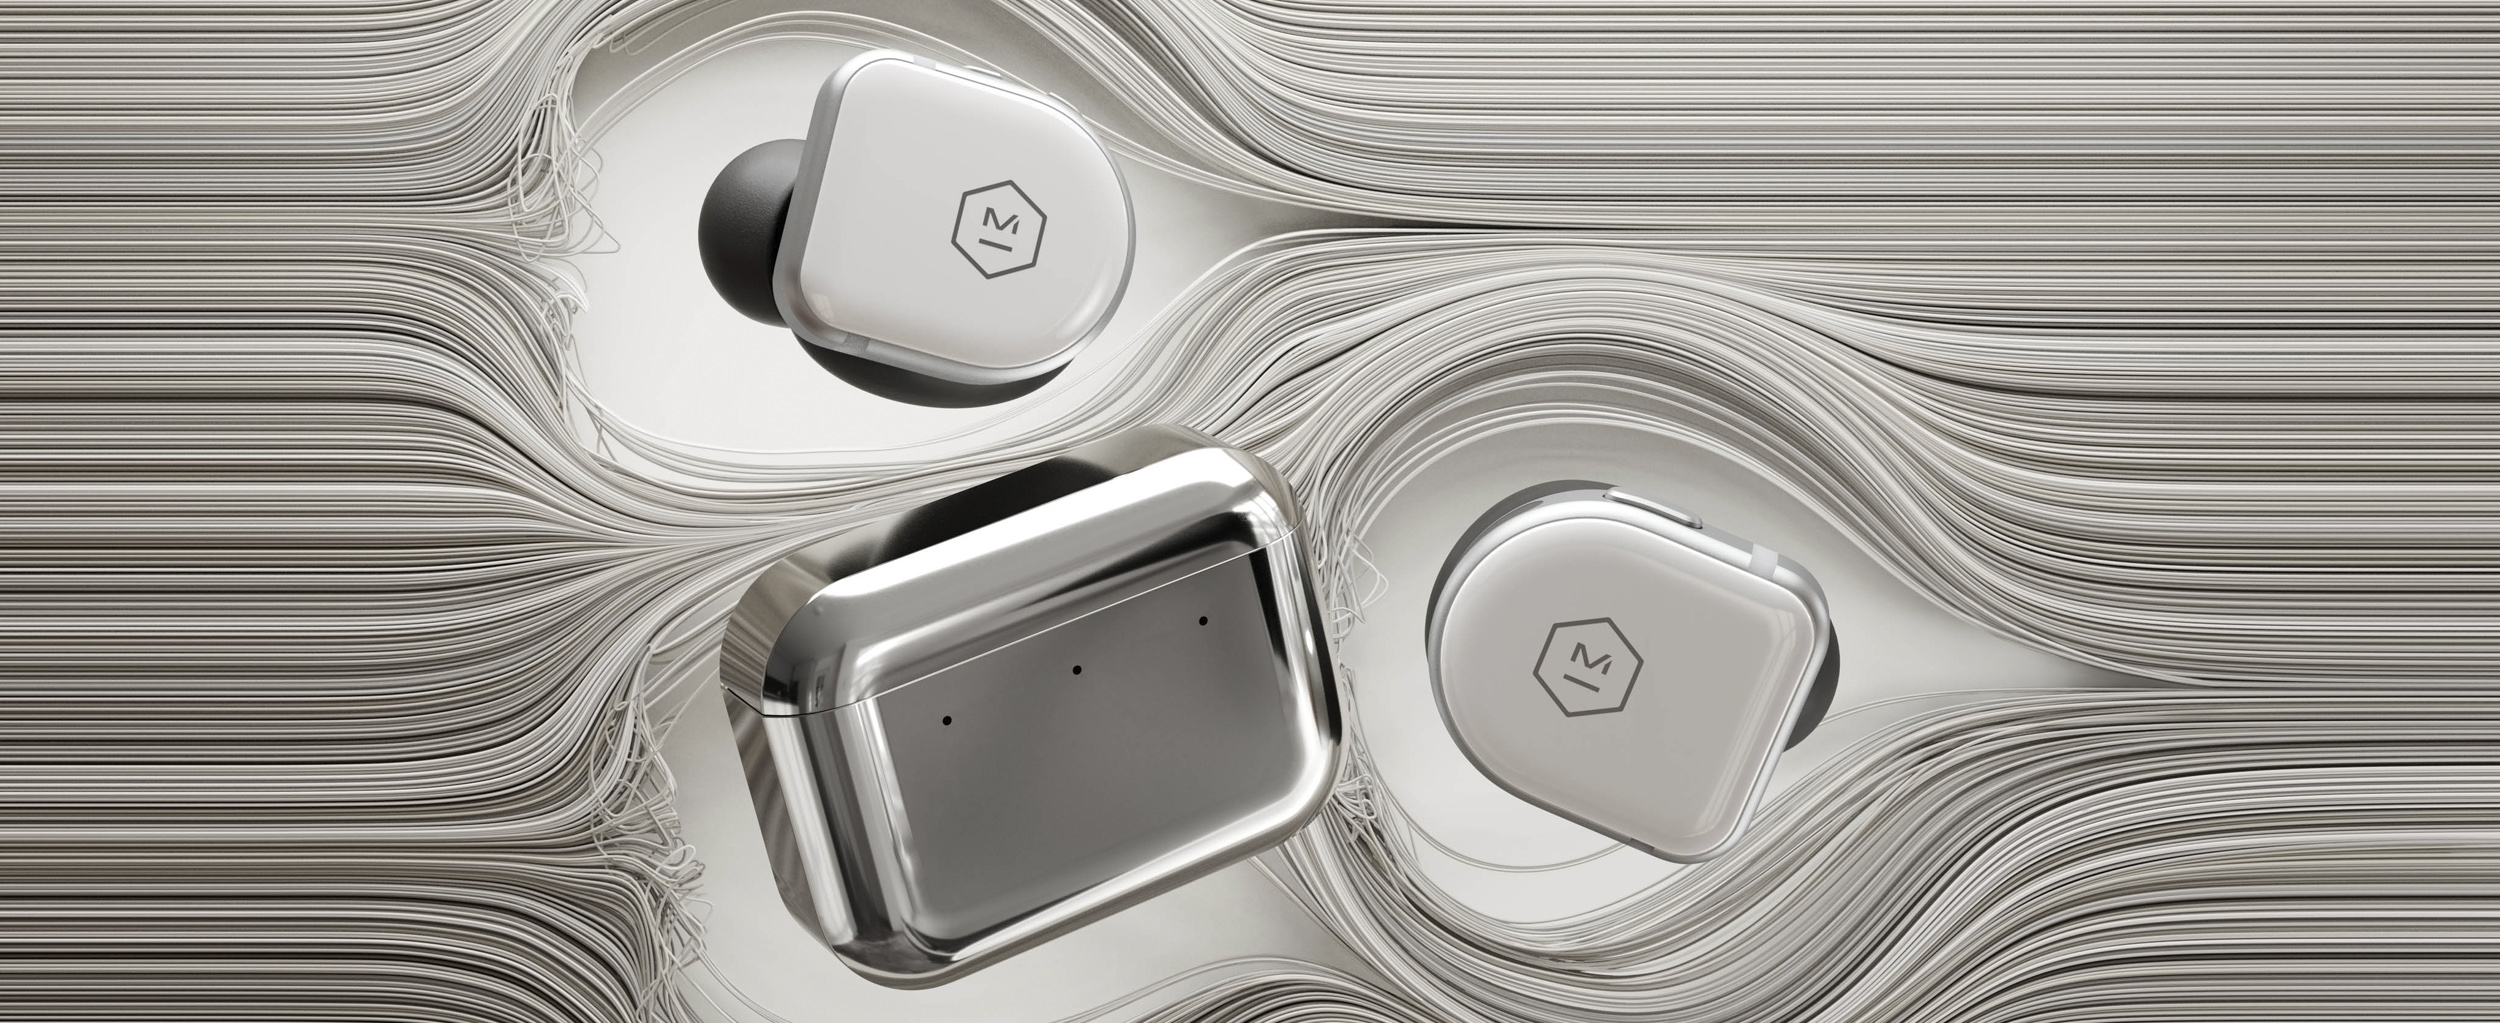 Introducing MW08 Active Noise-Cancelling True Wireless Earphones